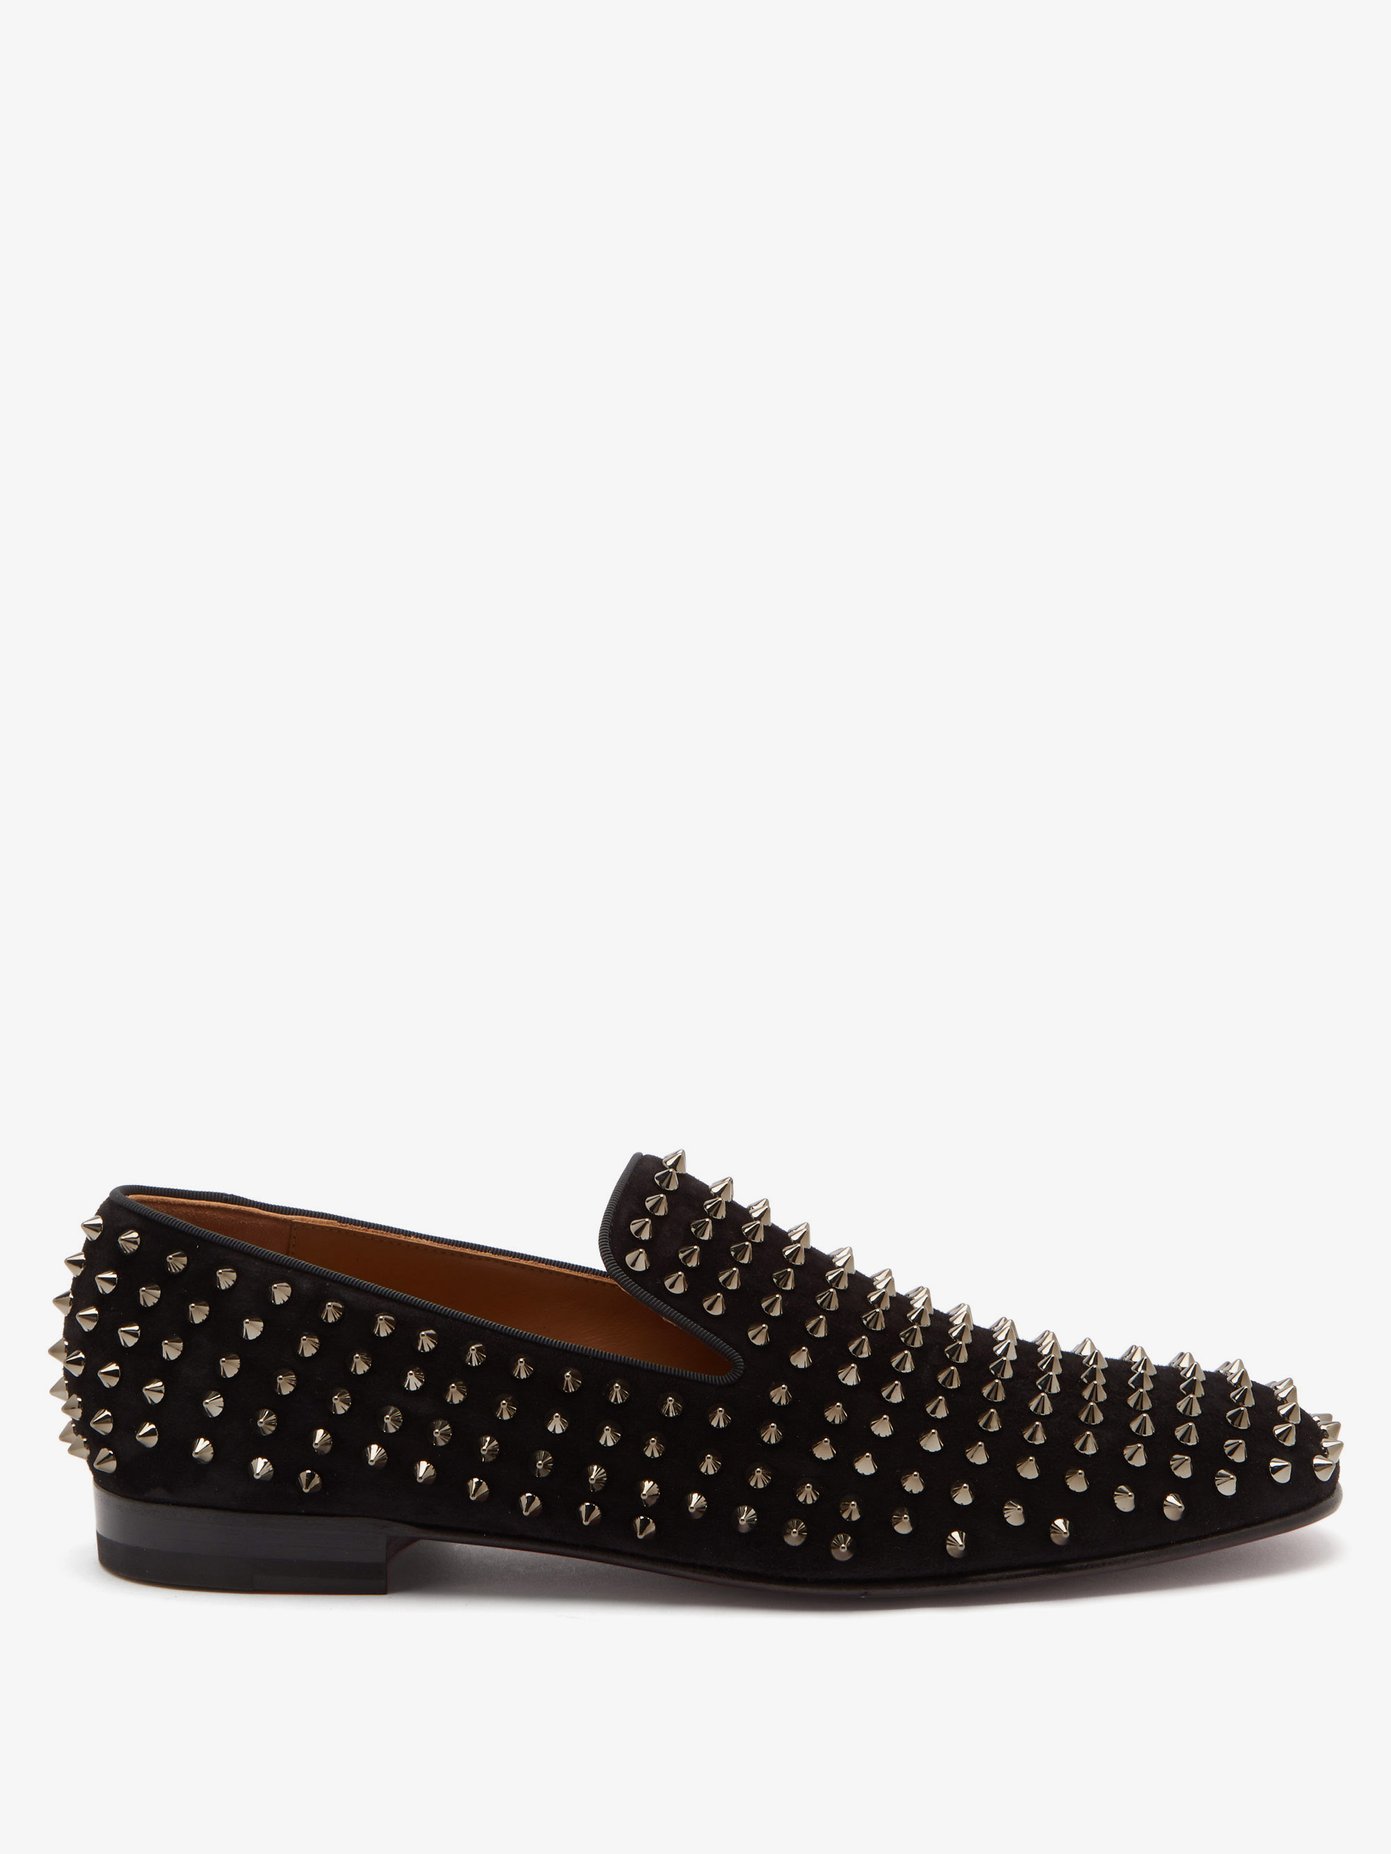 loafers with spikes on them